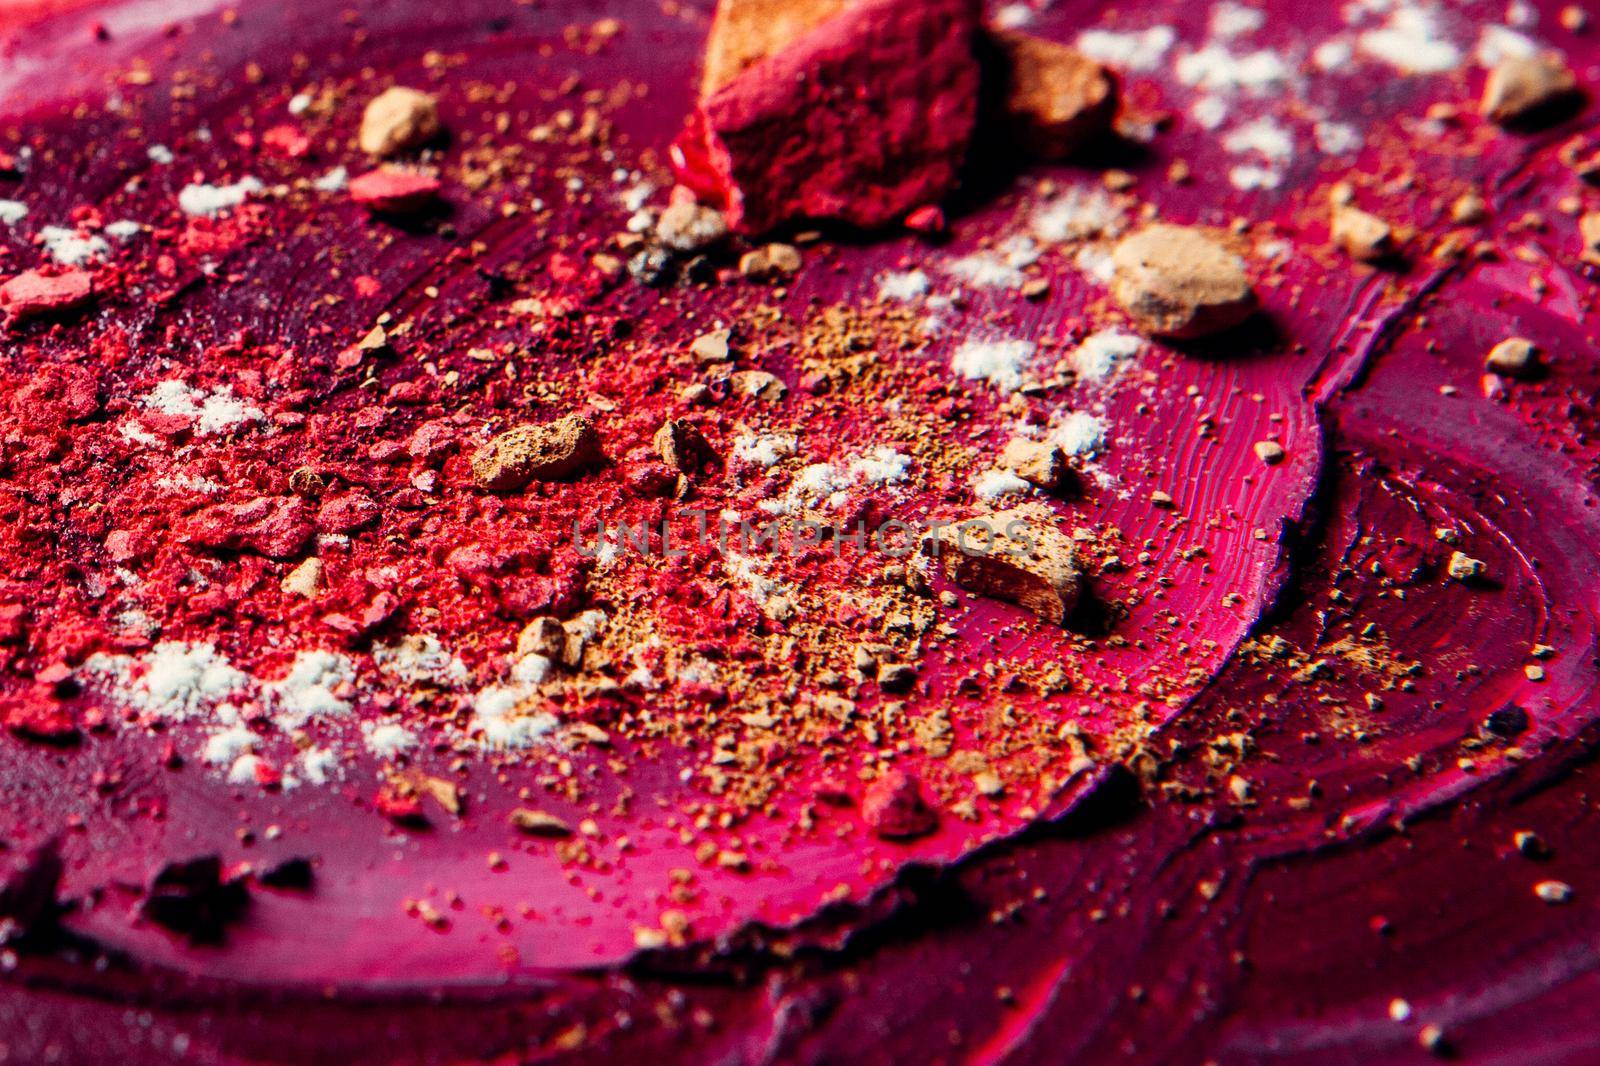 crushed make-up products - beauty and cosmetics styled concept, elegant visuals